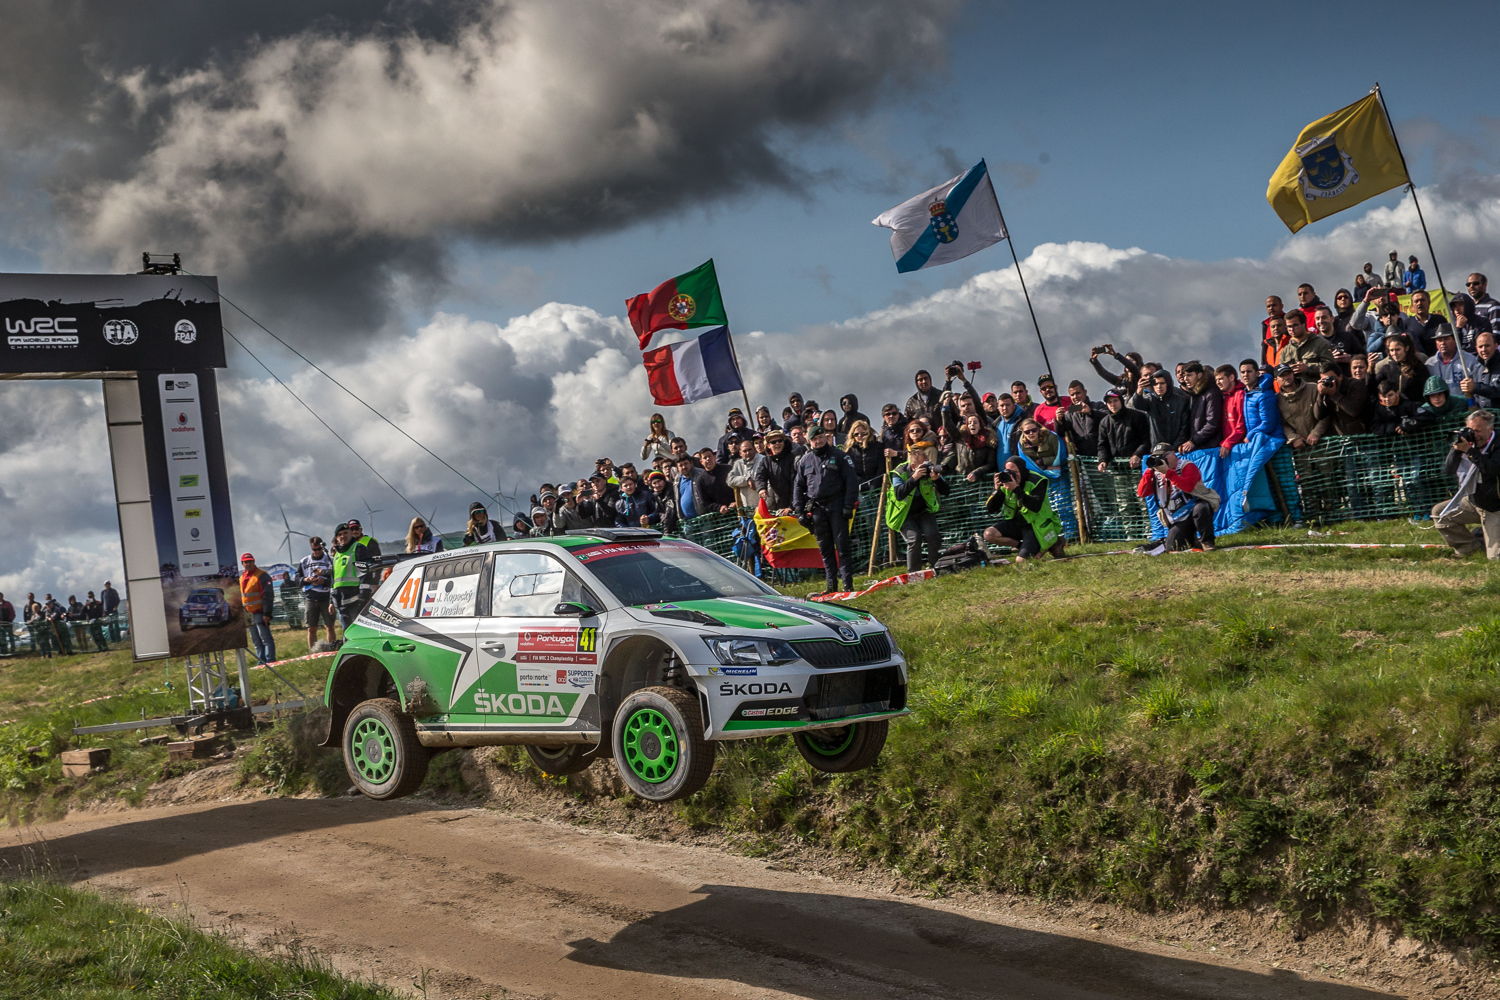 The driver teams are successfully continuing ŠKODA’s 115-year motorsport tradition with the ŠKODA Fabia R5.